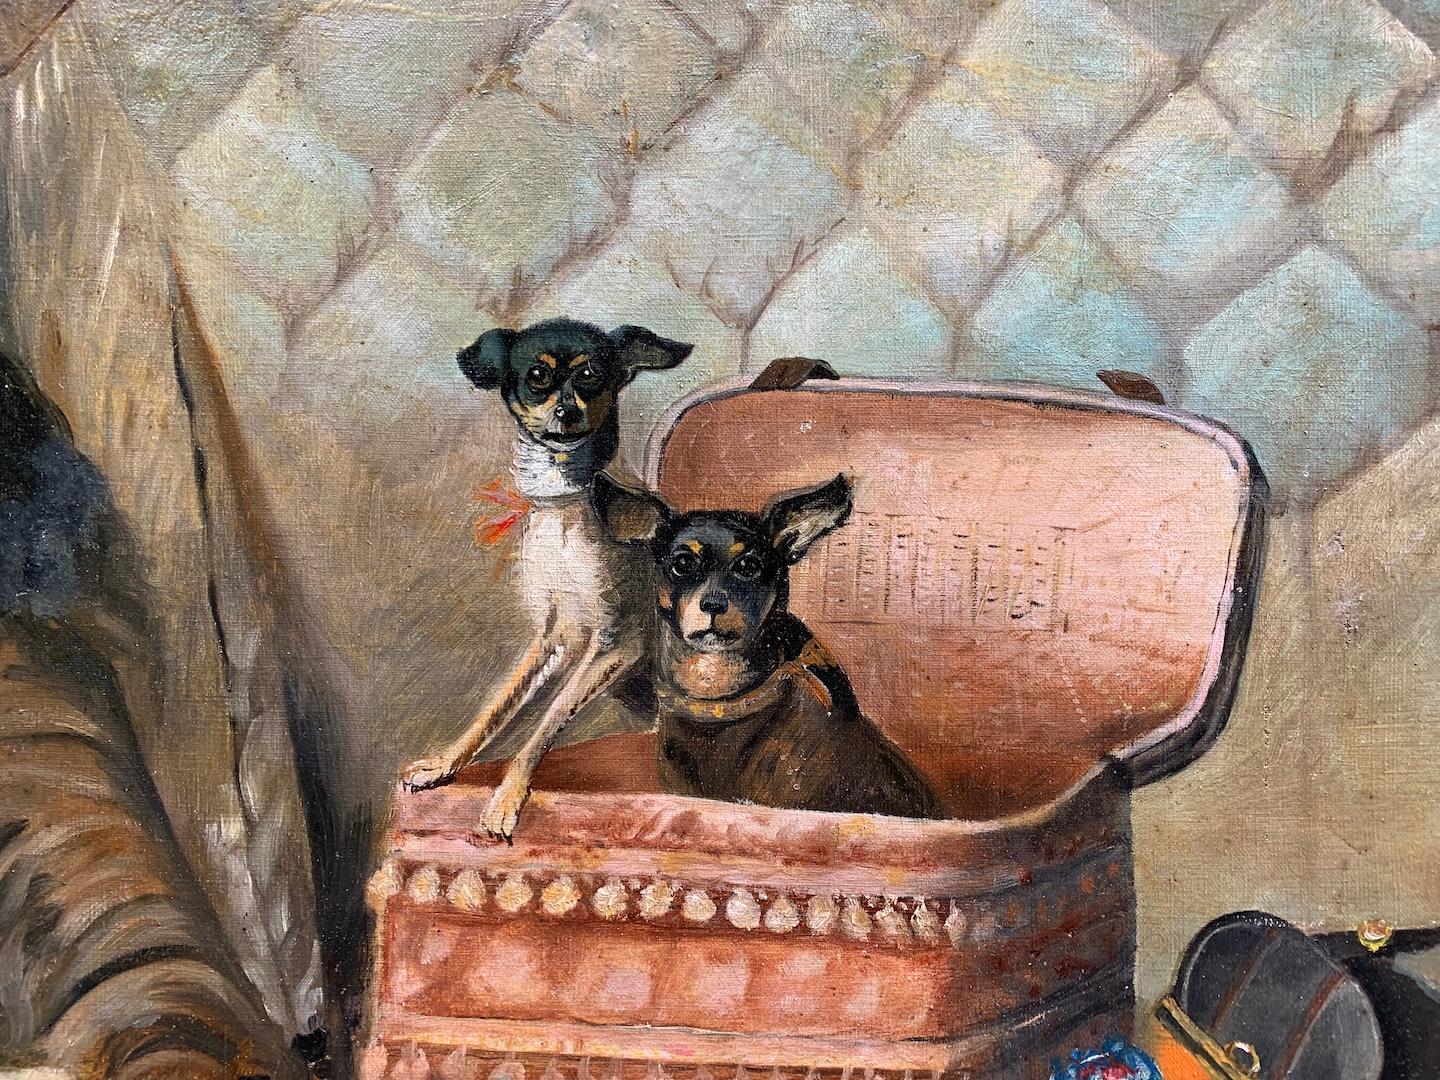 19th century Antique French school portrait of two dogs playing in a box - Painting by 19th century French School